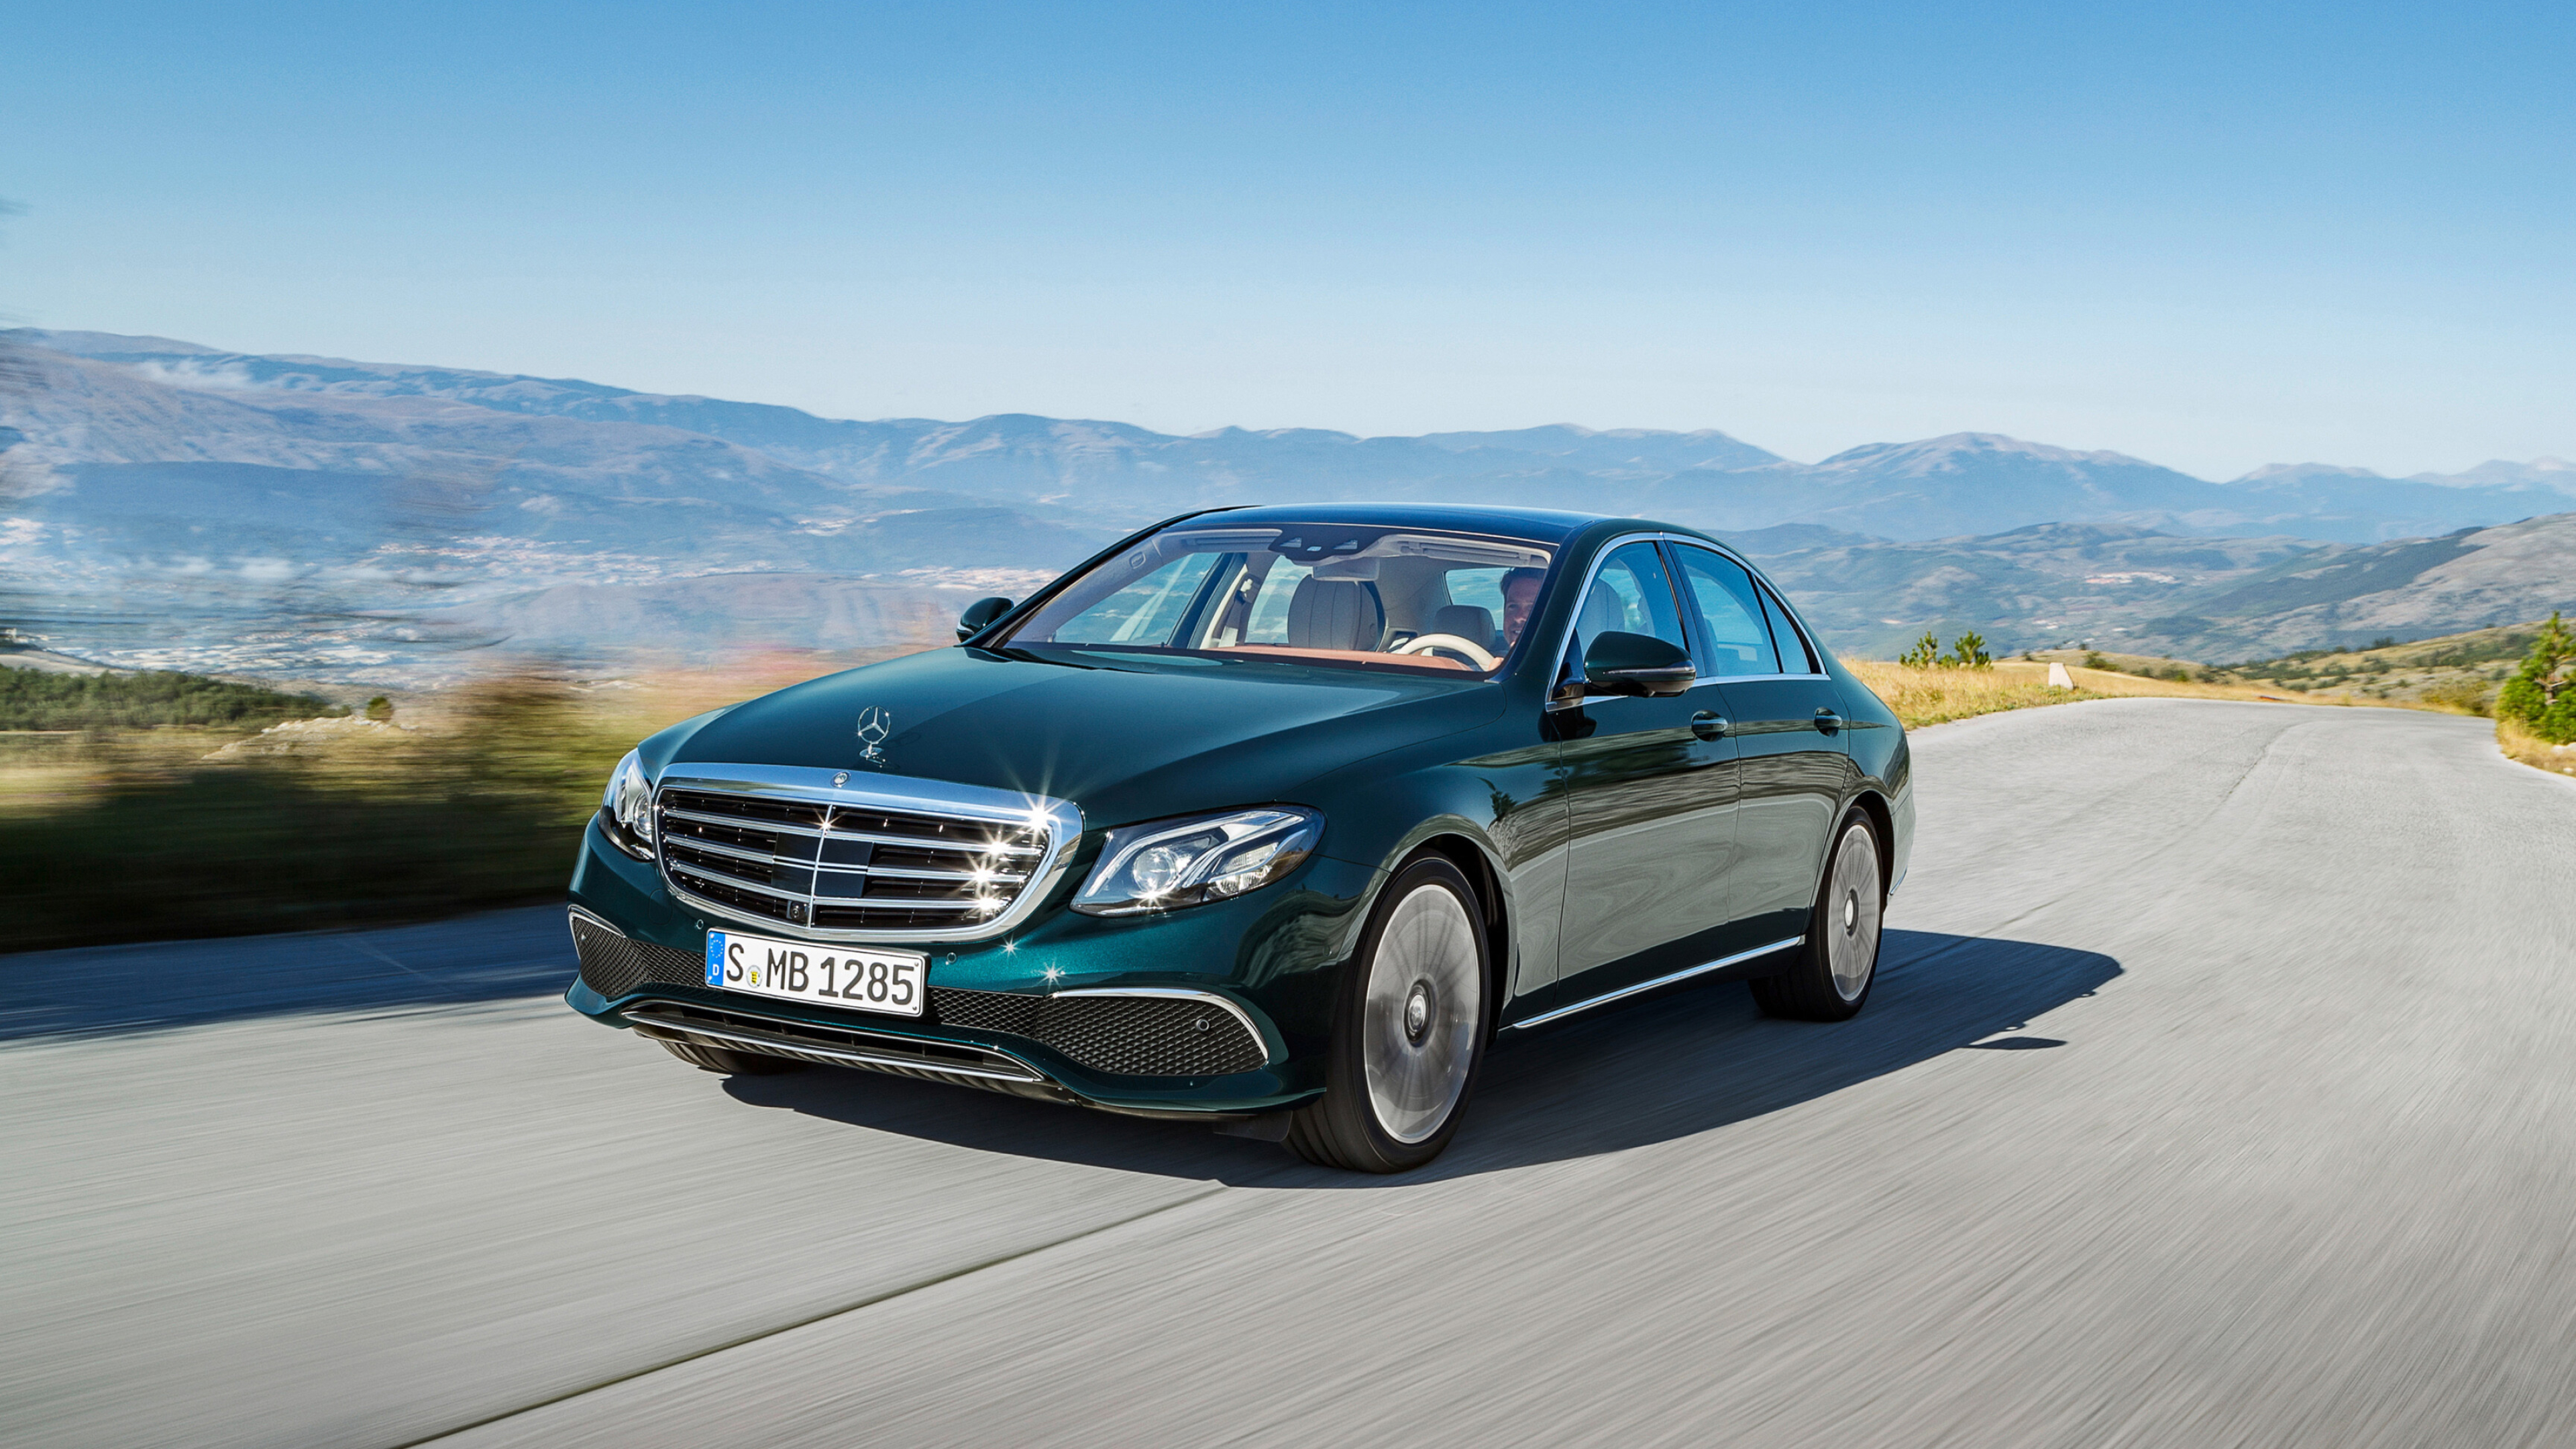 Mercedes-Benz: E-class cars, A-series (W176) is manufactured in Uusikaupunki since late 2013. 3840x2160 4K Wallpaper.